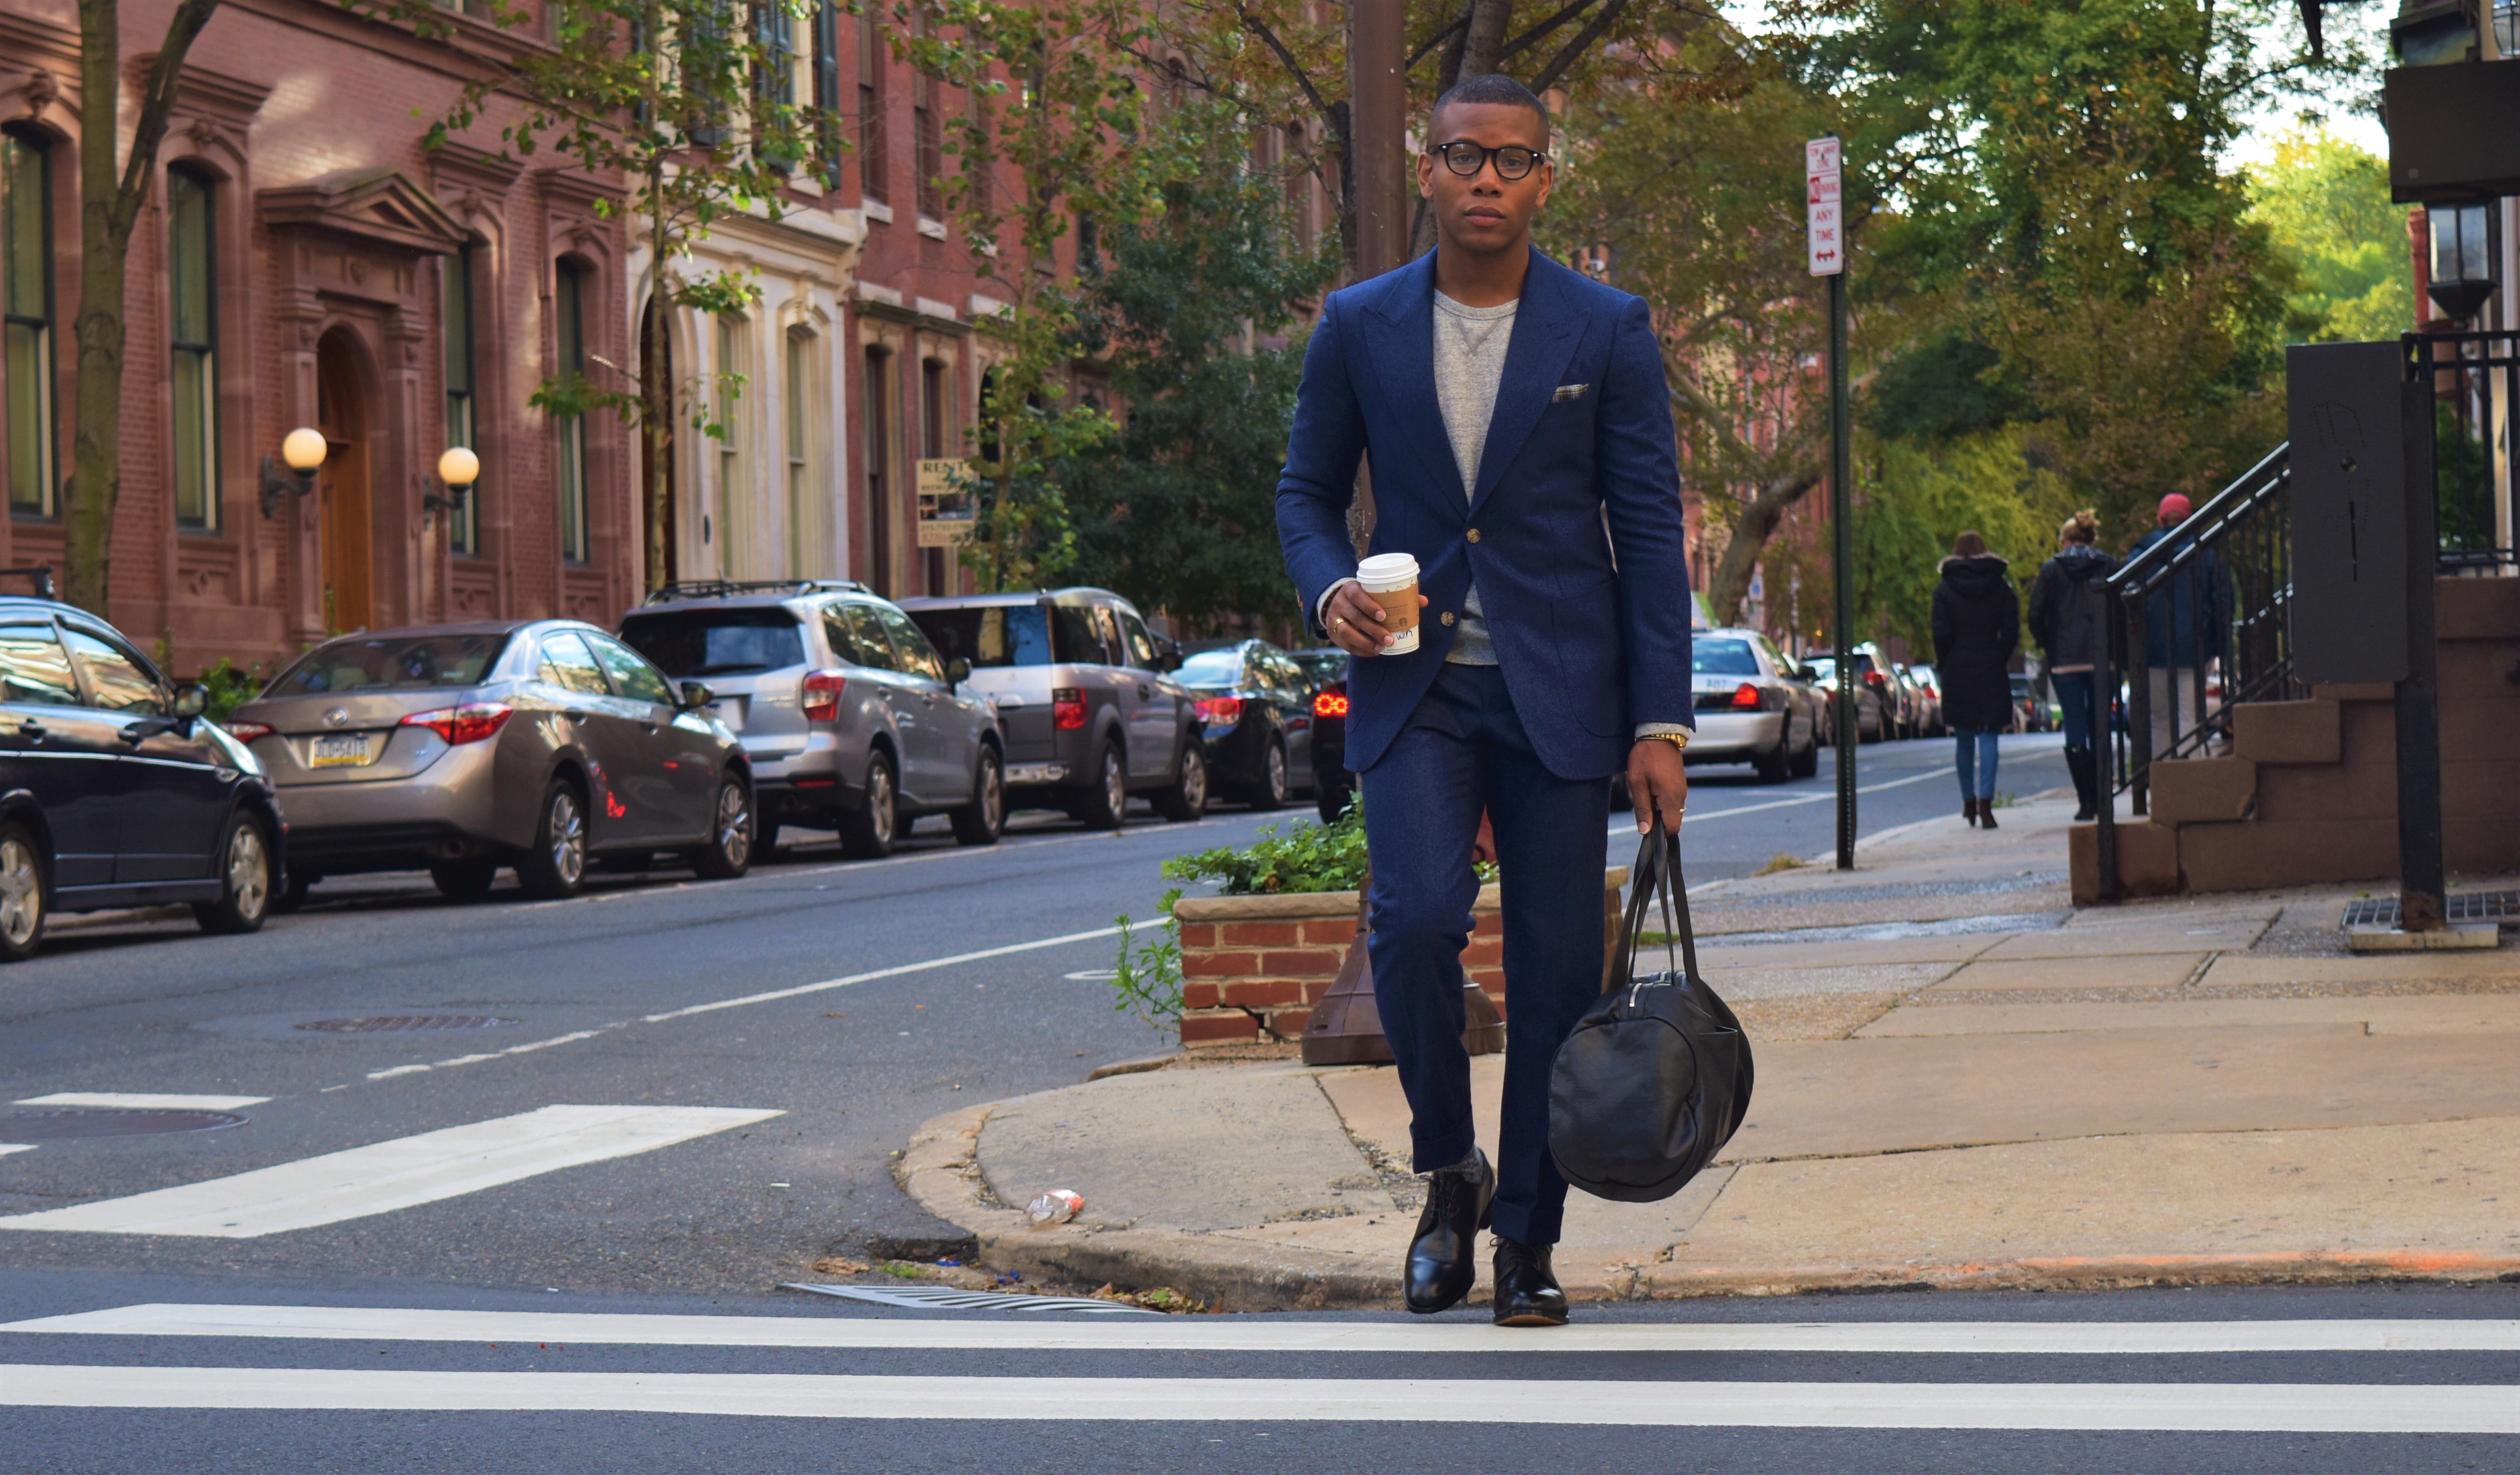 Sabir M. Peele of Men's Style Pro in Acura's Look The Part Campaign Wear Suitsupply Washington Suit